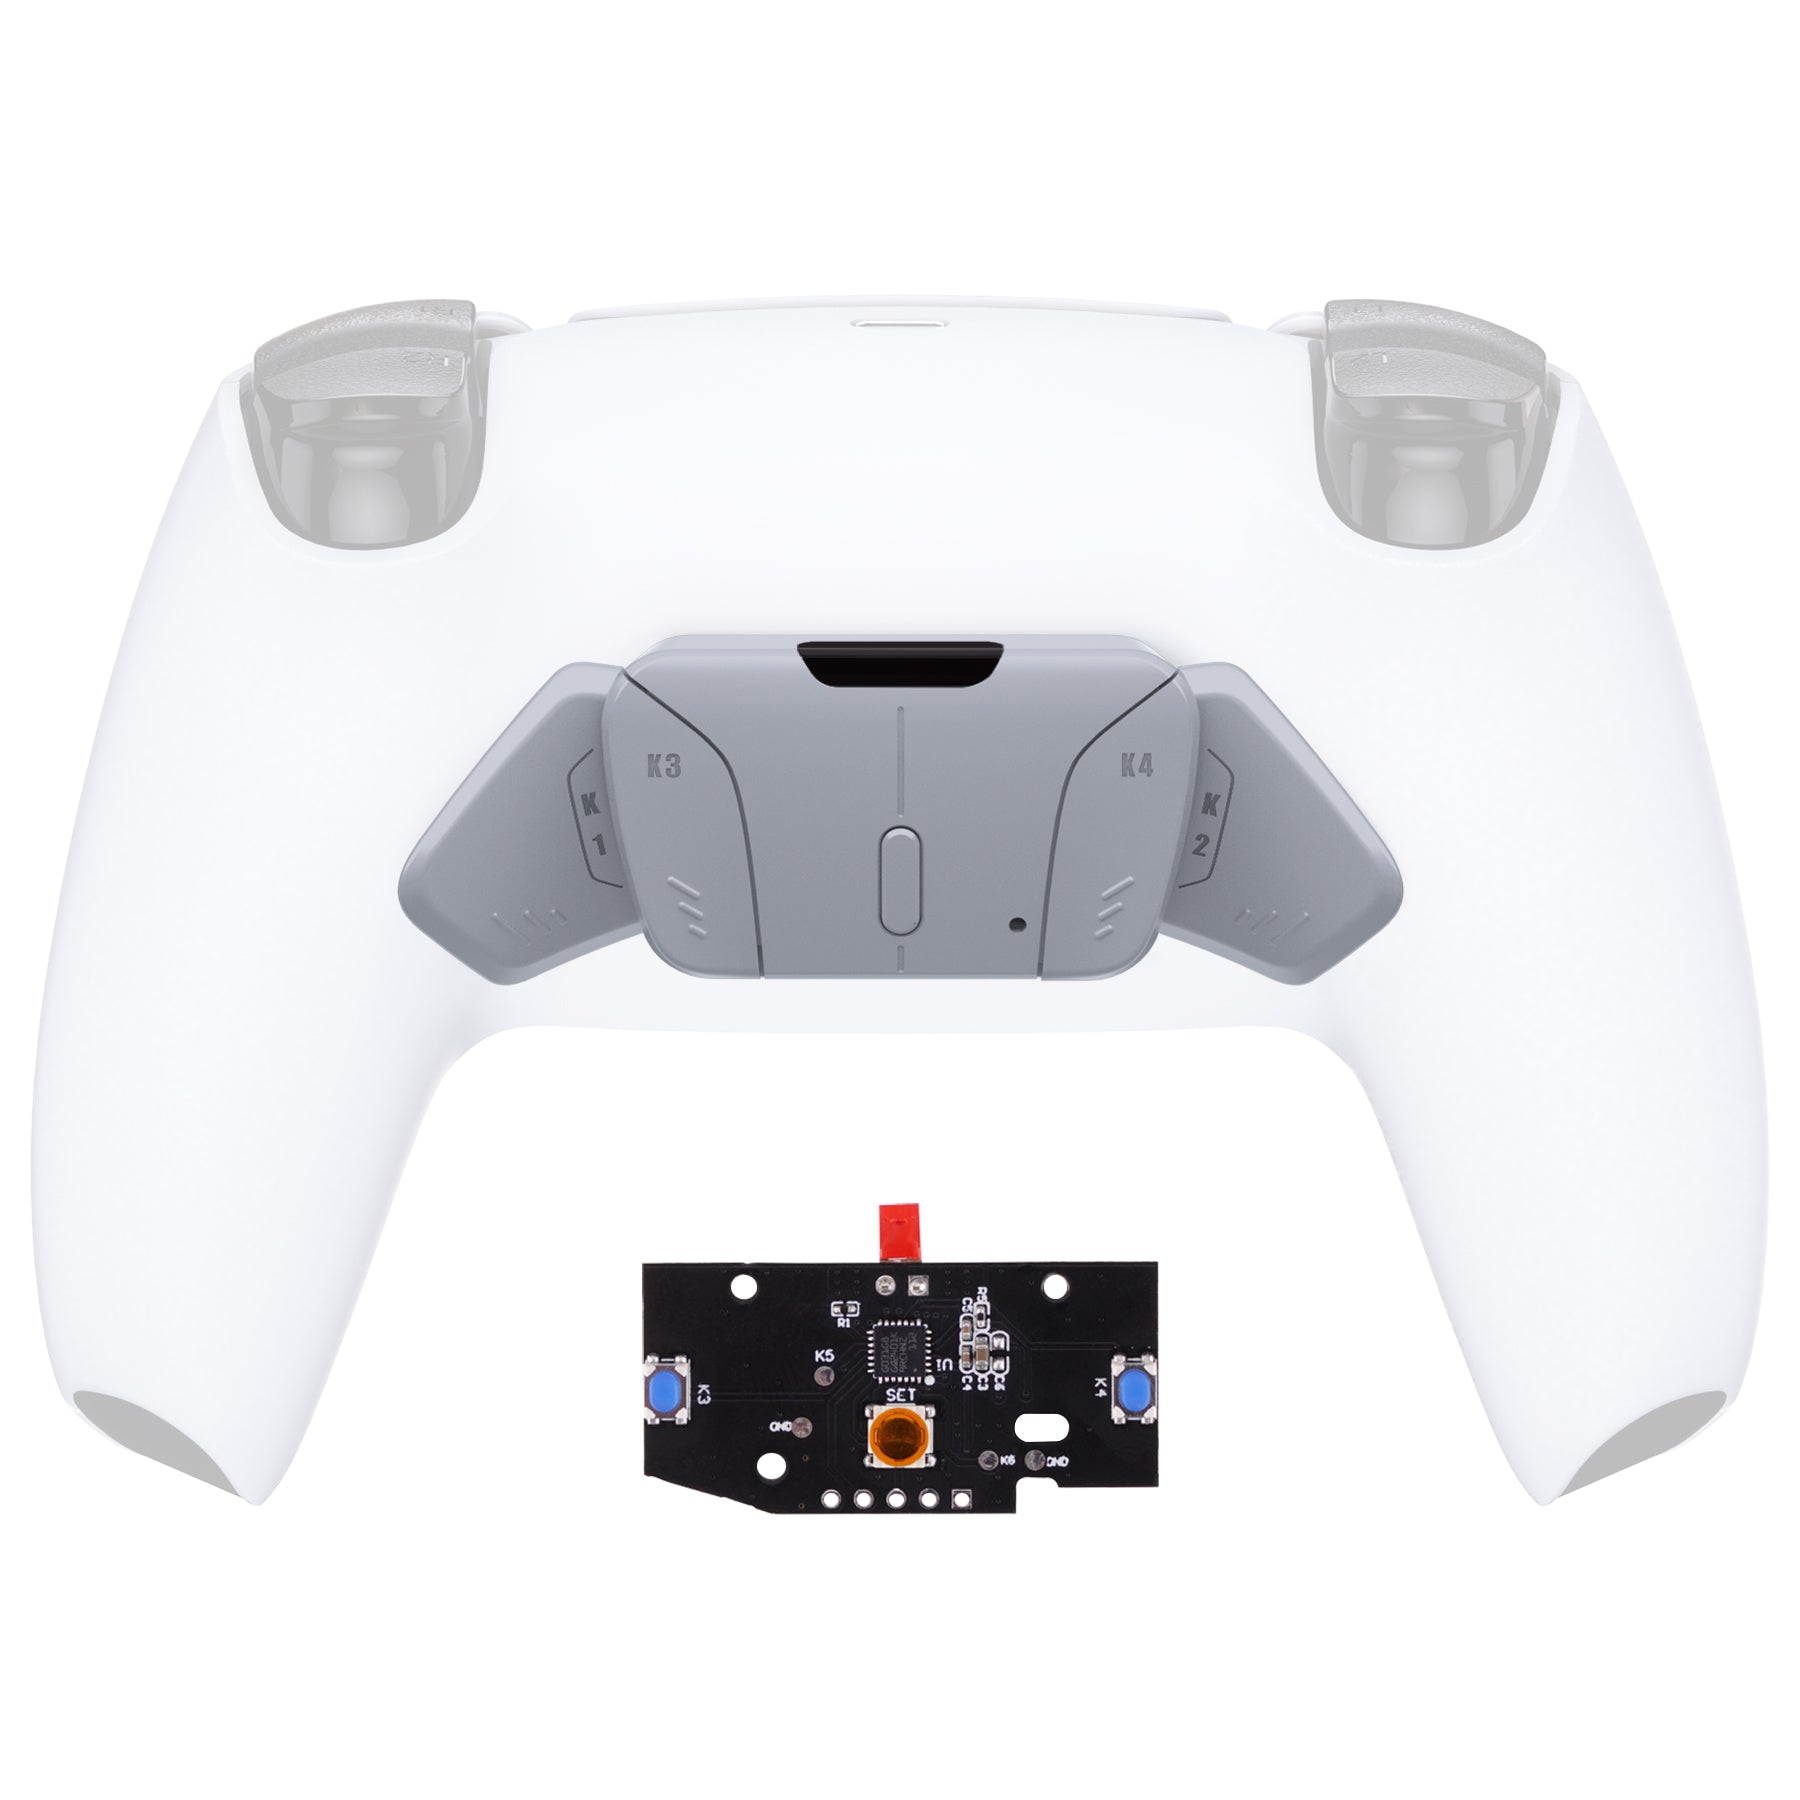 eXtremeRate Retail Turn RISE to RISE4 Kit – Redesigned New Hope Gray K1 K2 K3 K4 Back Buttons Housing & Remap PCB Board for PS5 Controller eXtremeRate RISE & RISE4 Remap kit - Controller & Other RISE Accessories NOT Included - VPFM5010P